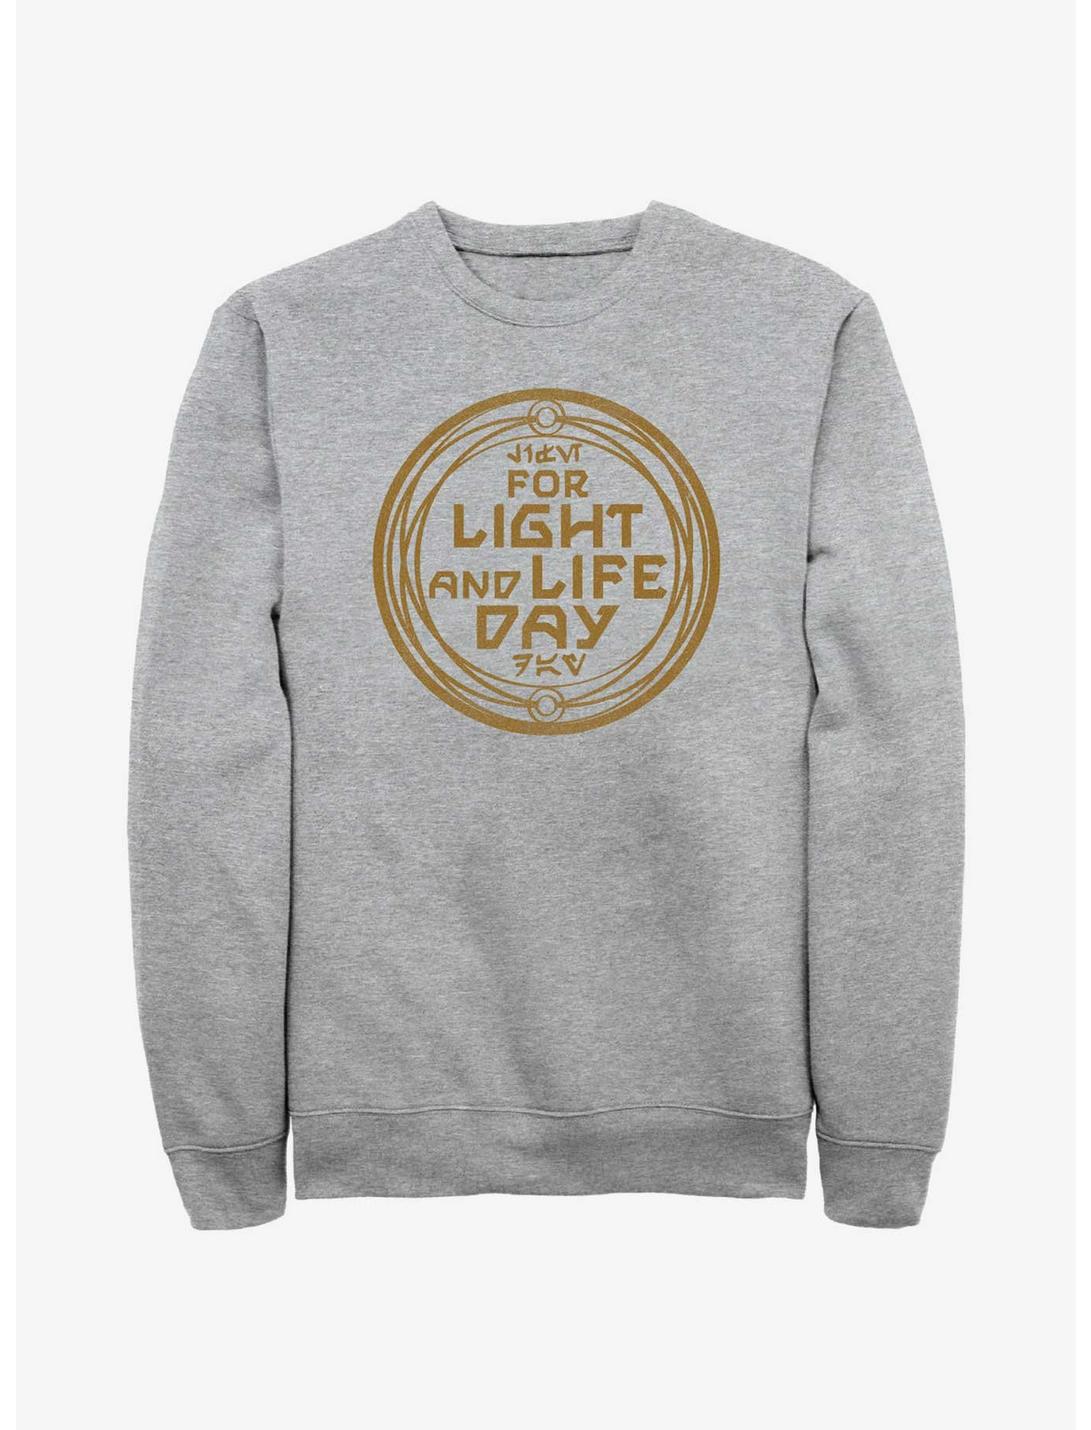 Star Wars For Light And Life Day Badge Sweatshirt, ATH HTR, hi-res